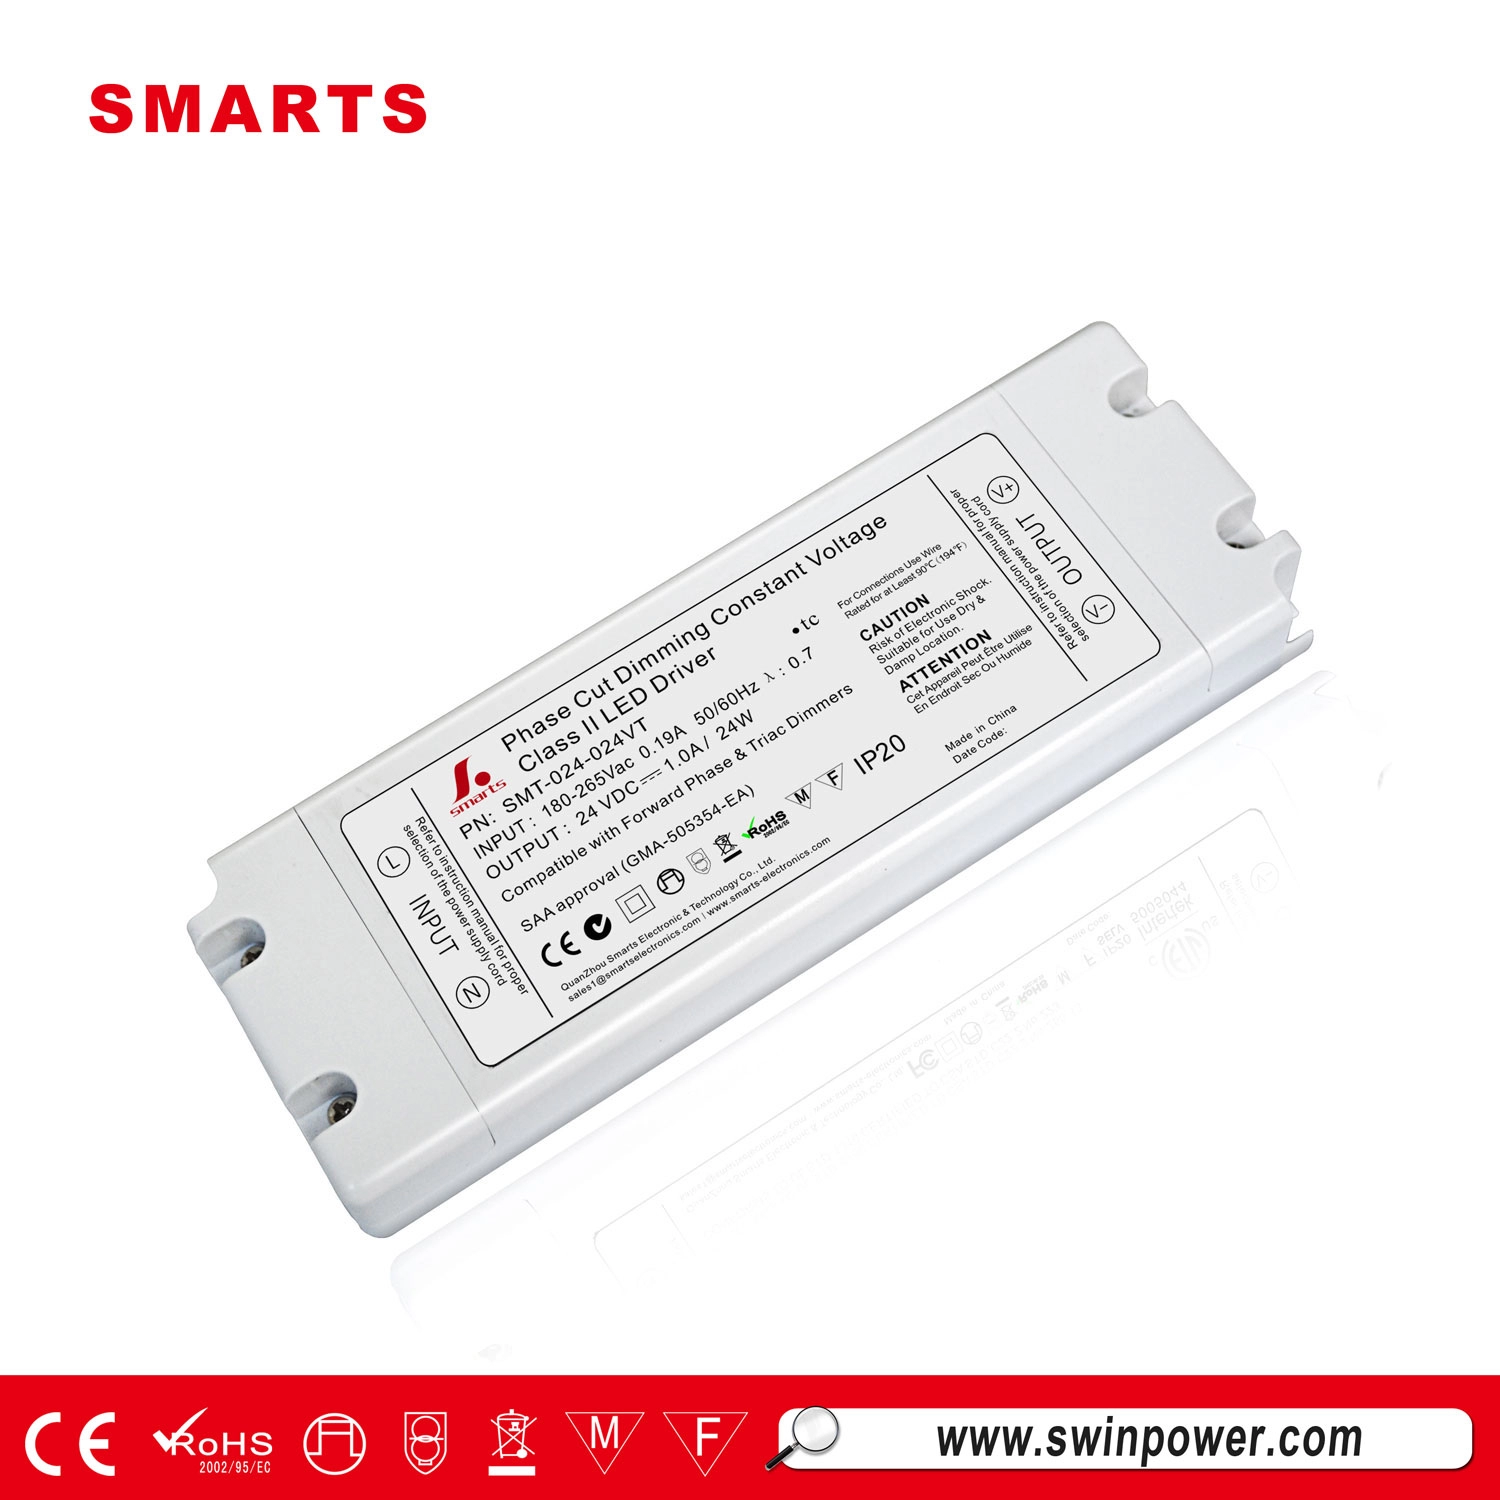 24v 24w Constant Voltage Triac Dimmable Led Power Supply